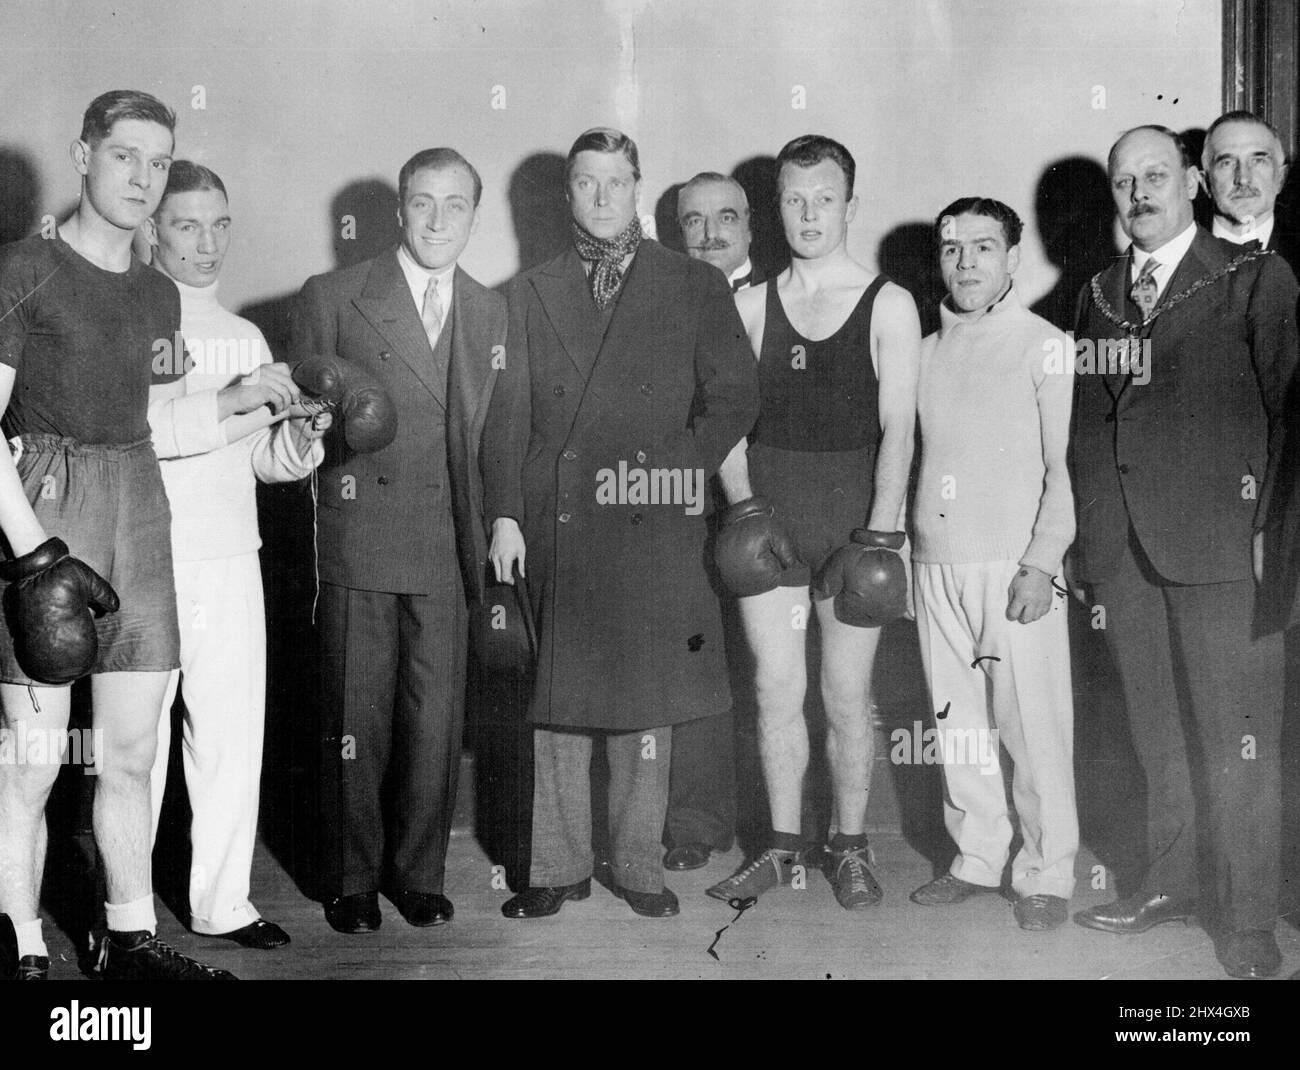 Prince of Wales attends Amateur Boxing tournament at West Ham. The Prince of Wales was present at the amateur boxing tournament in aid of St. Mary's Plaistow and St. Bartholomews Hospitals, at the Public Hall, West Ham, London. Photo Shows: The Prince of Wales at the match, with some of the boxers. November 17, 1931 Stock Photo